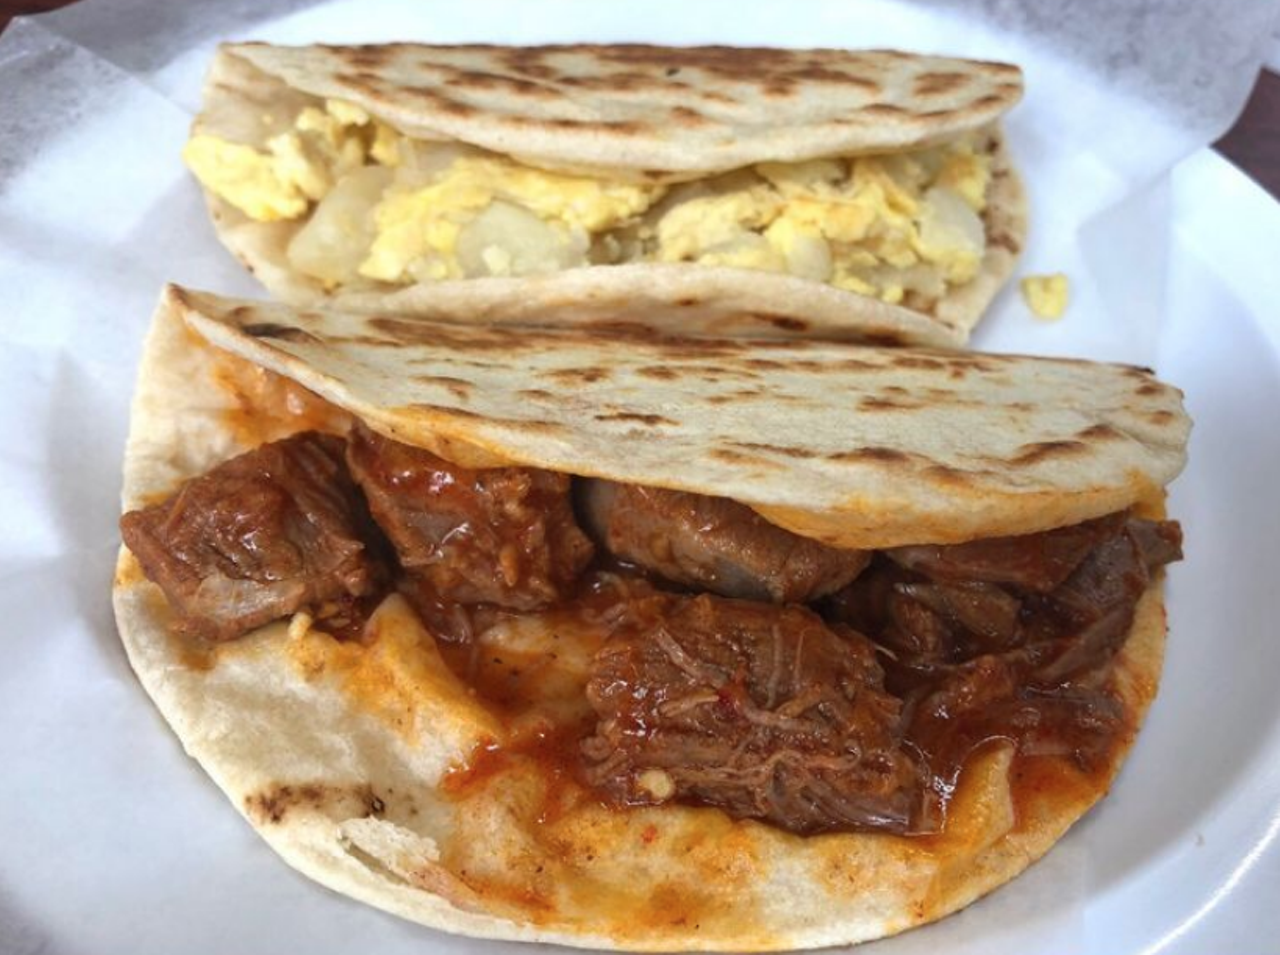 Losoya's Taqueria
13444 West Ave No100, (210) 495-5999, losoyas.restaurant
When a taqueria is only open for breakfast and lunch, you can expect for the food to be absolutely fire. This laid-back spot offers more than 20 varieties of breakfast tacos, plus nearly 10 types of breakfast burritos, which will hit the spot for when you’re extra hungry.
Photo via Yelp / Lou C.